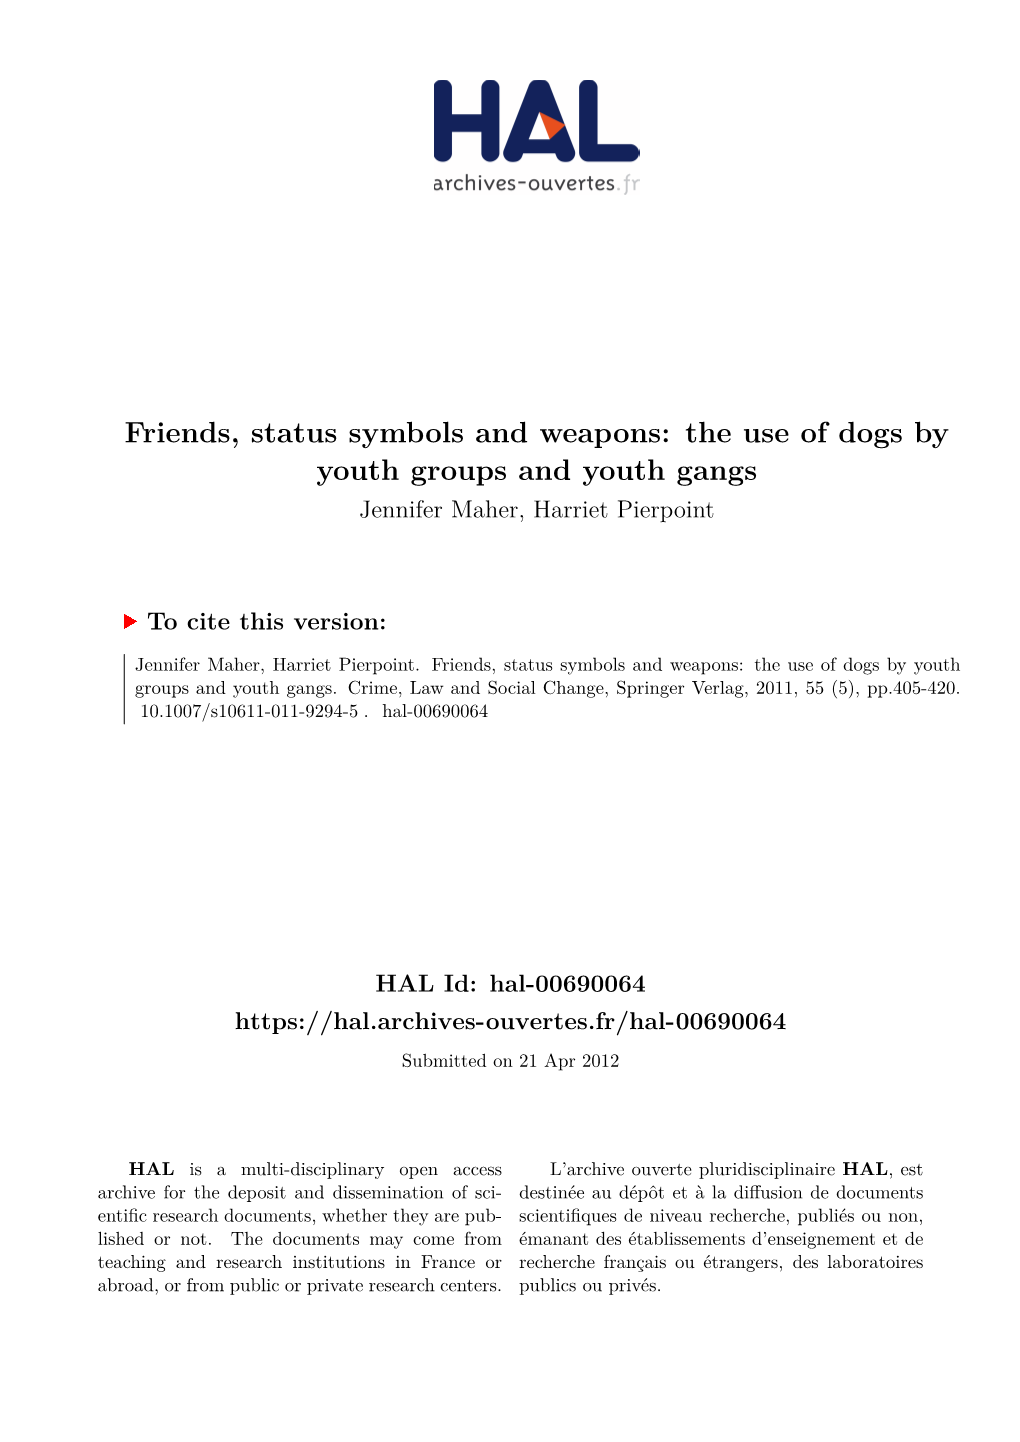 Friends, Status Symbols and Weapons: the Use of Dogs by Youth Groups and Youth Gangs Jennifer Maher, Harriet Pierpoint